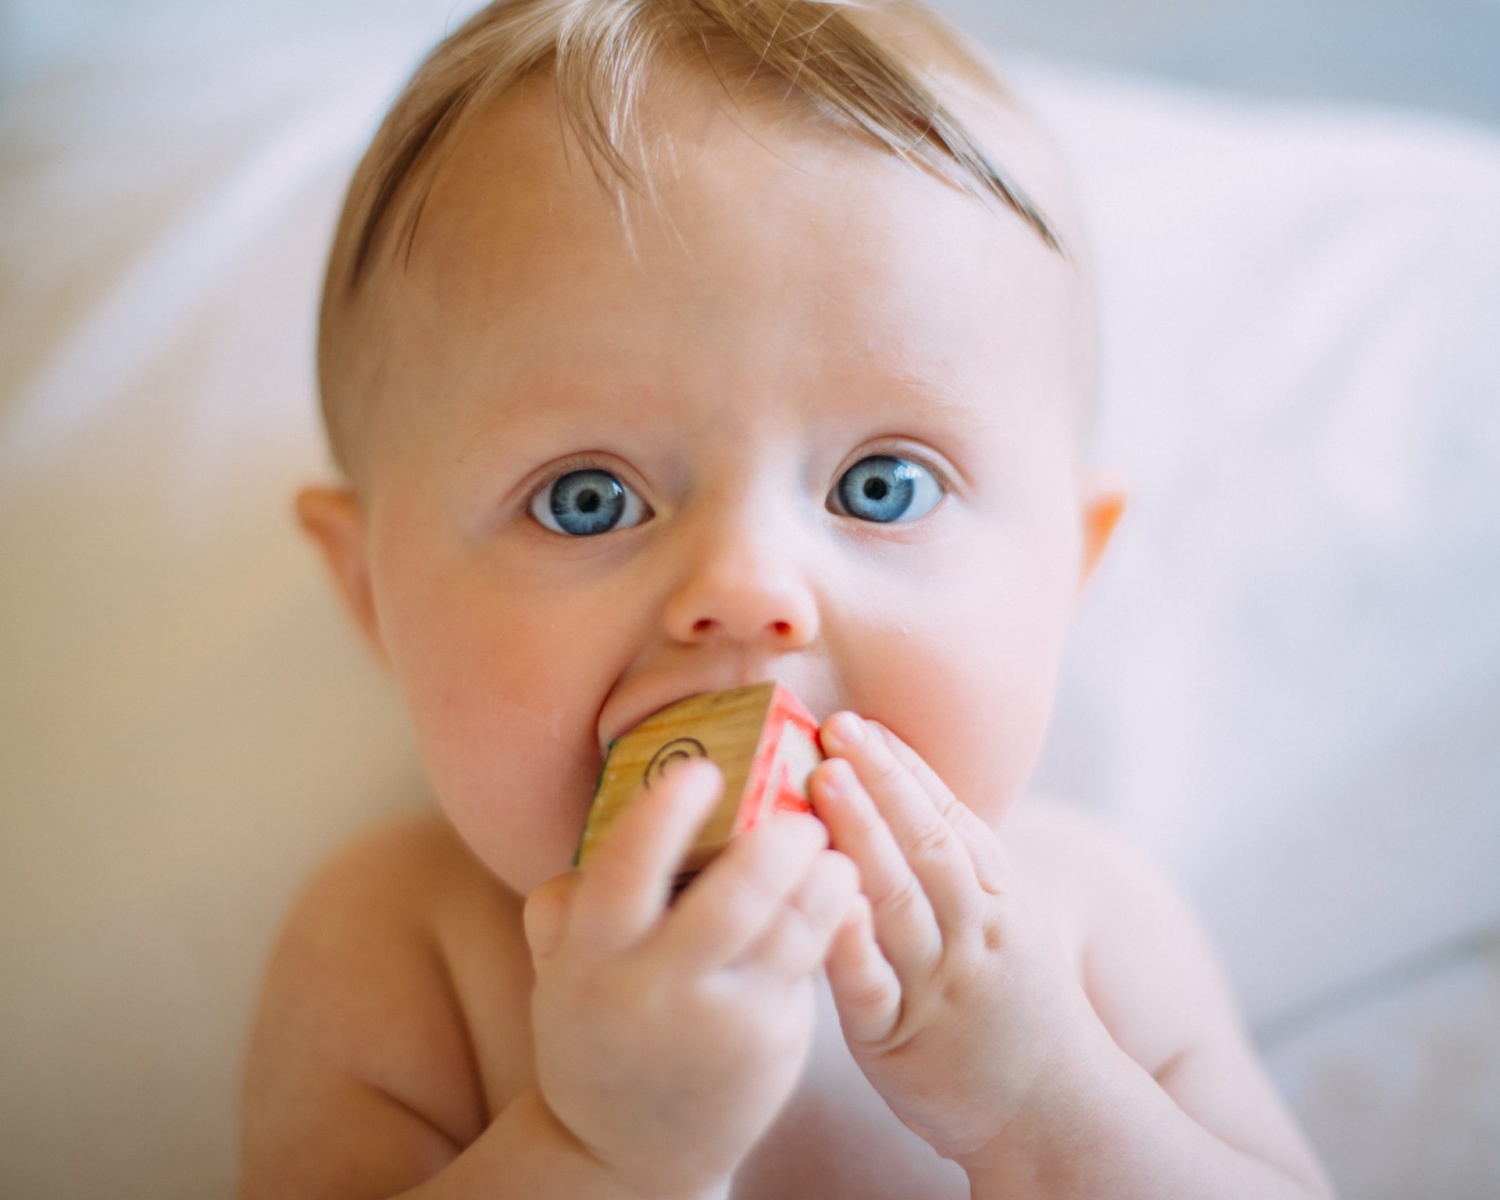 Spoon-Feeding Babies May Be Bad for Their Growth, as New Study Finds That Baby-Led Weaning Better for Development